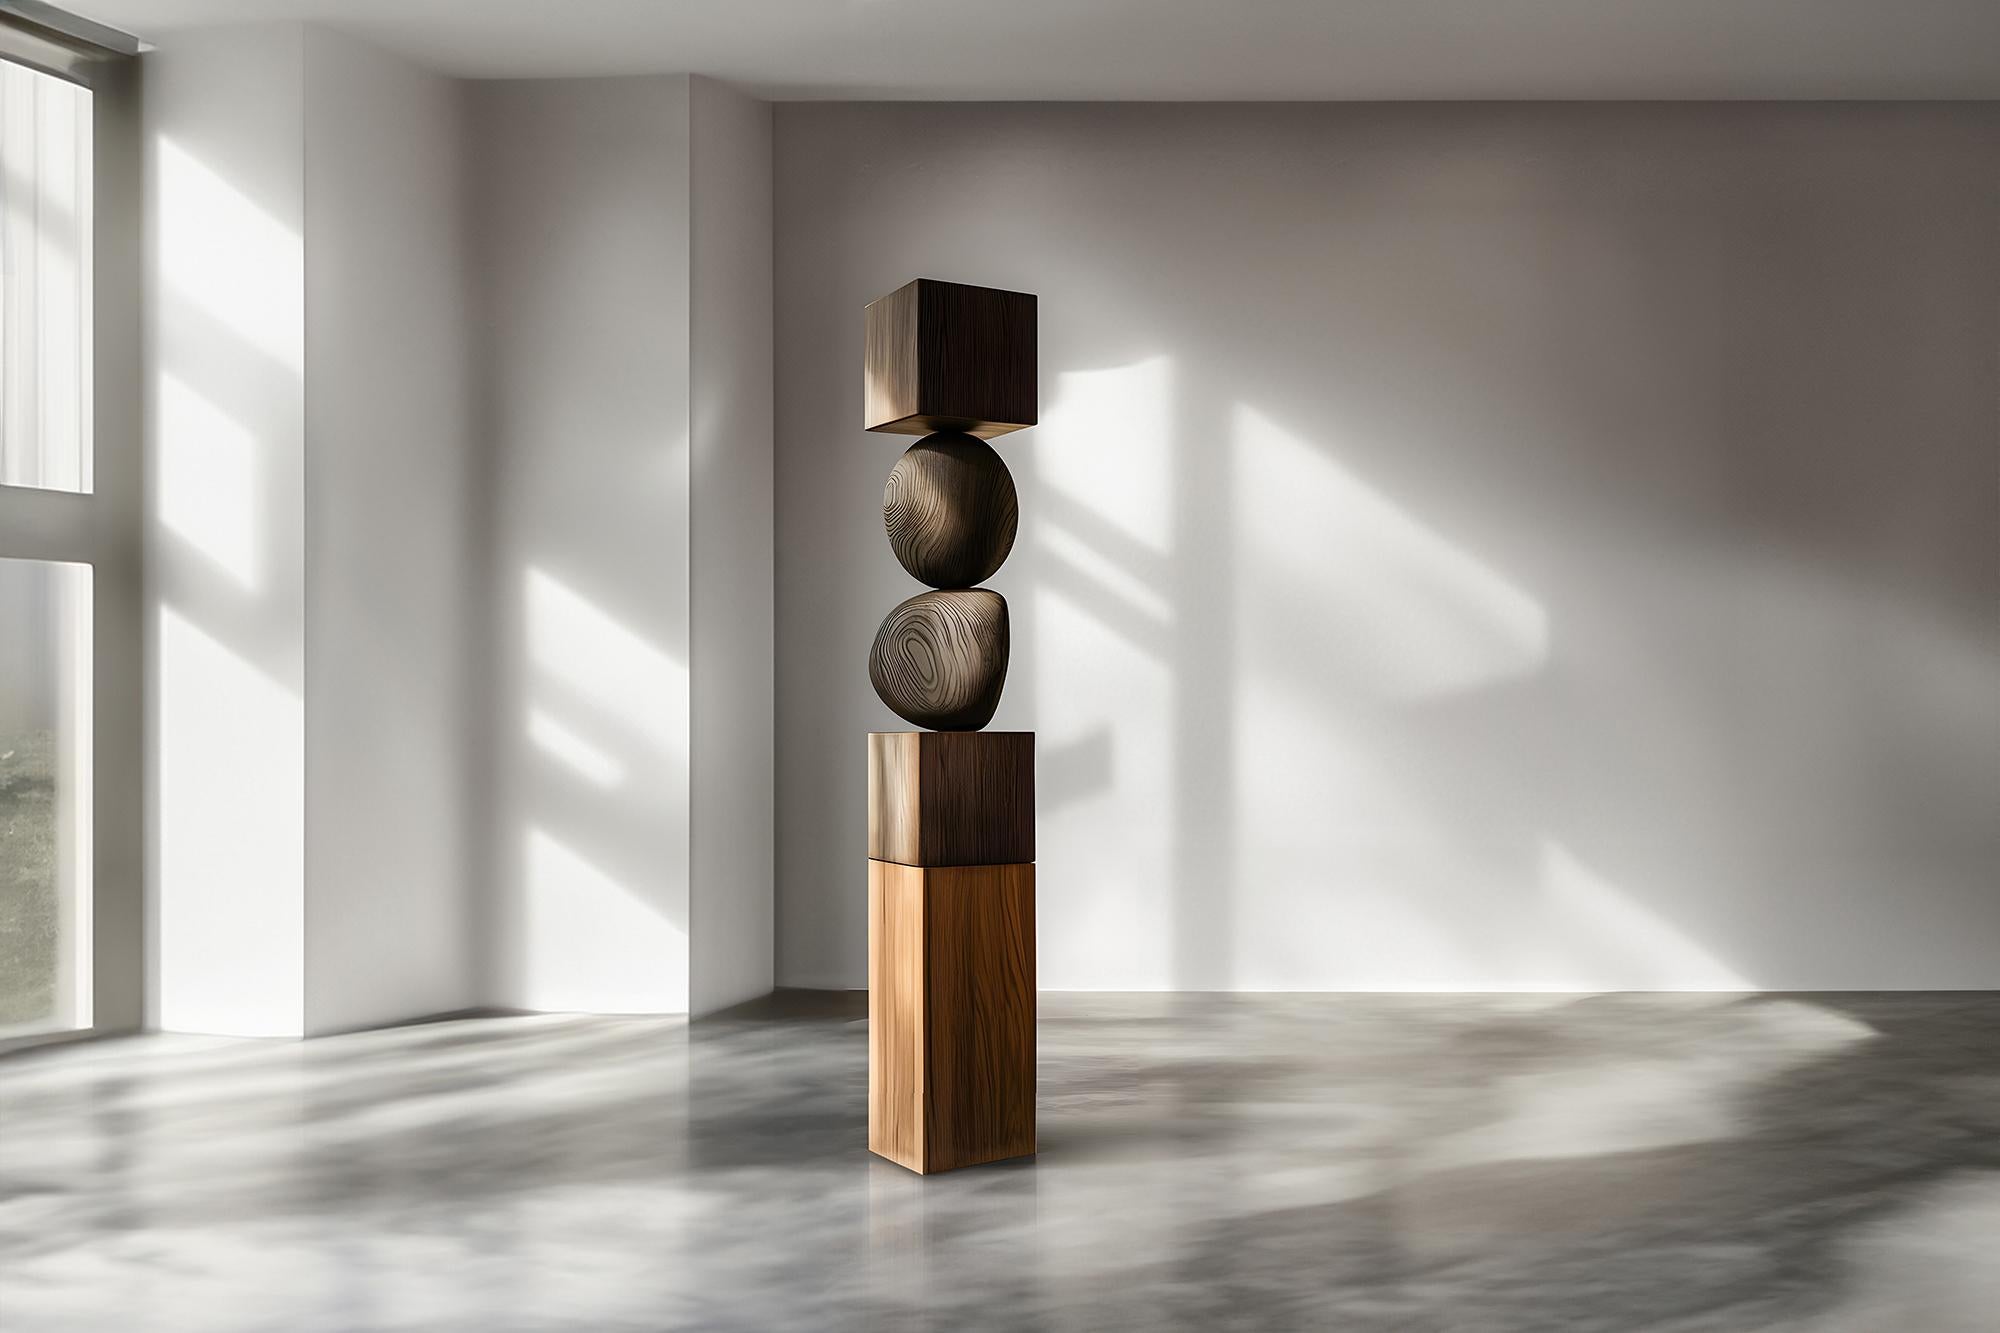 Joel Escalona's Modern Totem, Dark Burned Oak Creation, Still Stand No84
——


Joel Escalona's wooden standing sculptures are objects of raw beauty and serene grace. Each one is a testament to the power of the material, with smooth curves that flow